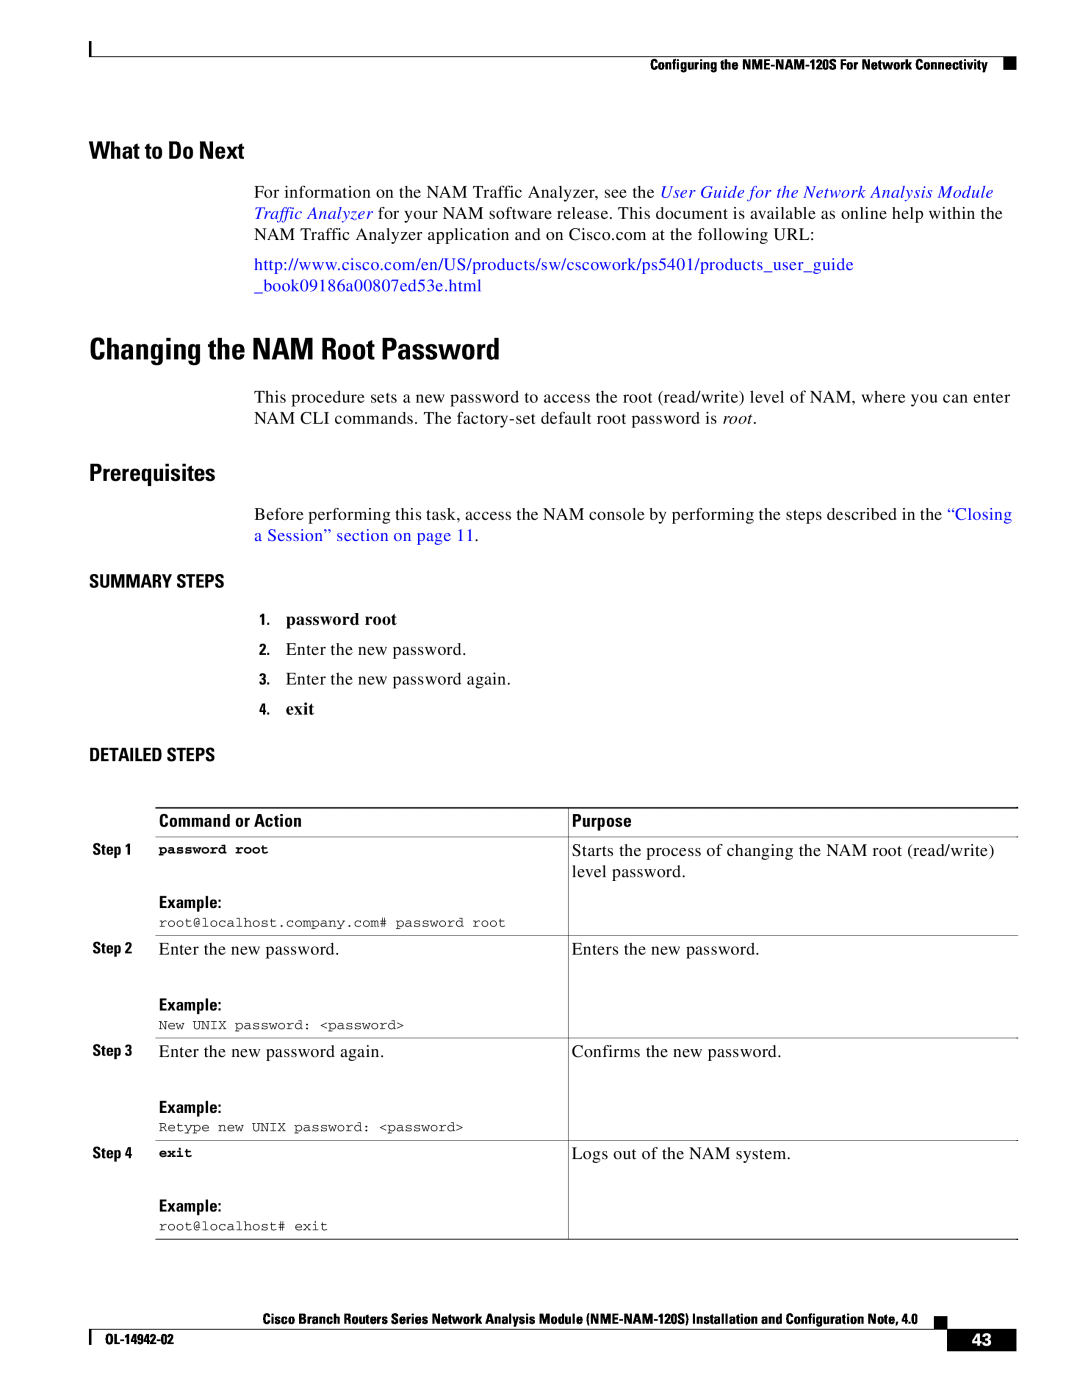 Cisco Systems SMNMADPTR Changing the NAM Root Password, password root, exit, What to Do Next, Prerequisites, Summary Steps 